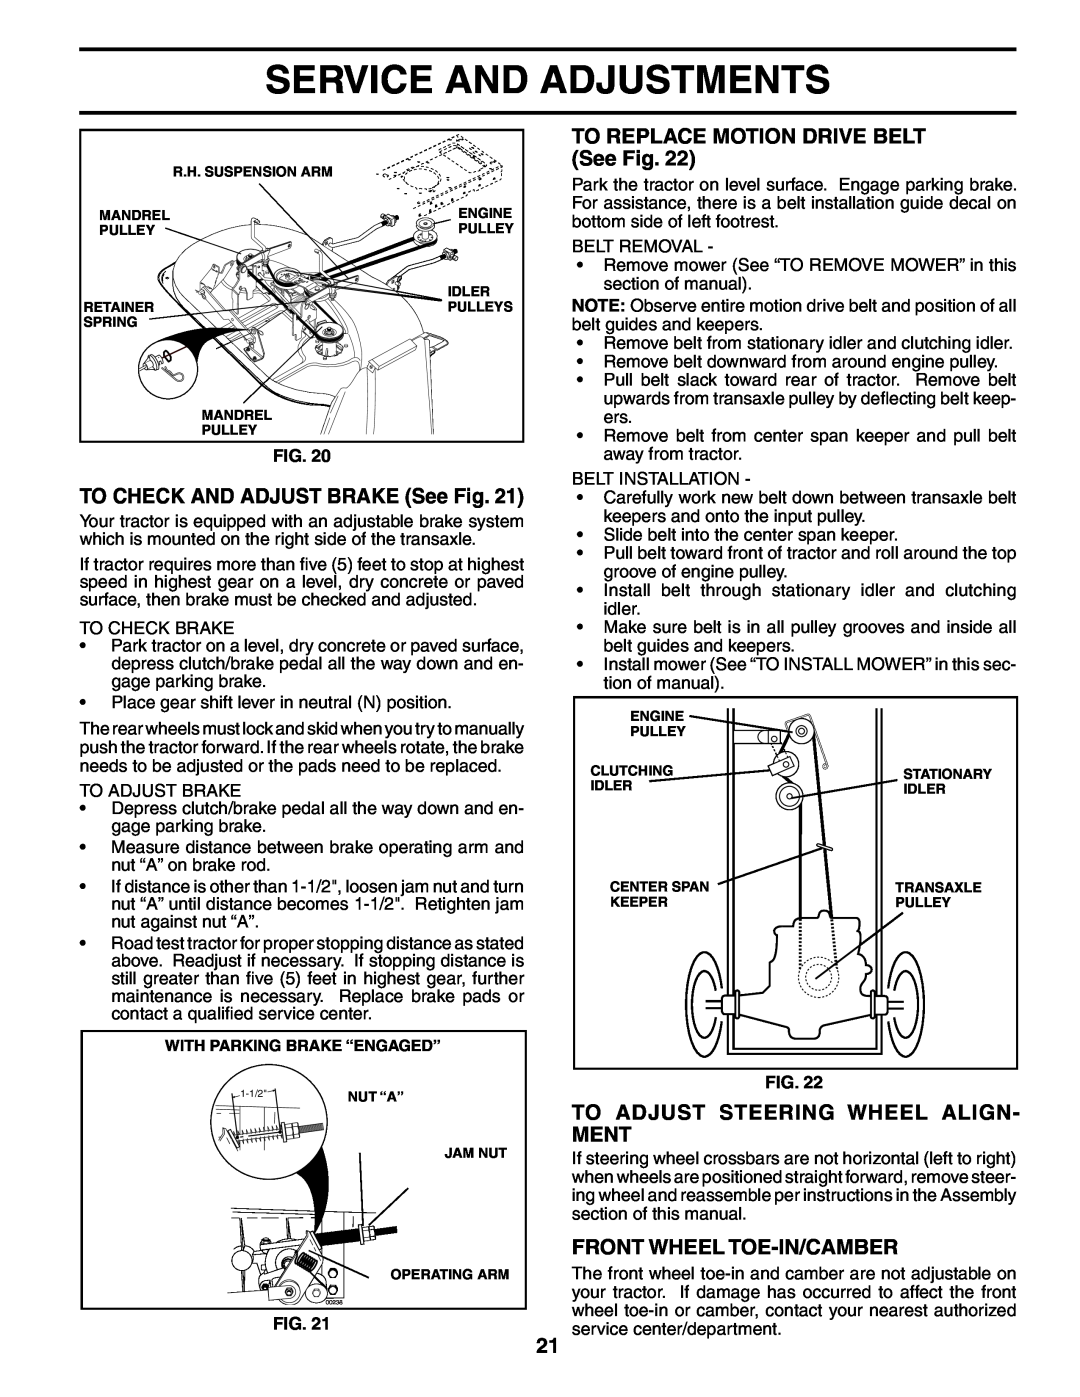 Weed Eater 184404 manual TO CHECK AND ADJUST BRAKE See Fig, TO REPLACE MOTION DRIVE BELT See Fig, Front Wheel Toe-In/Camber 